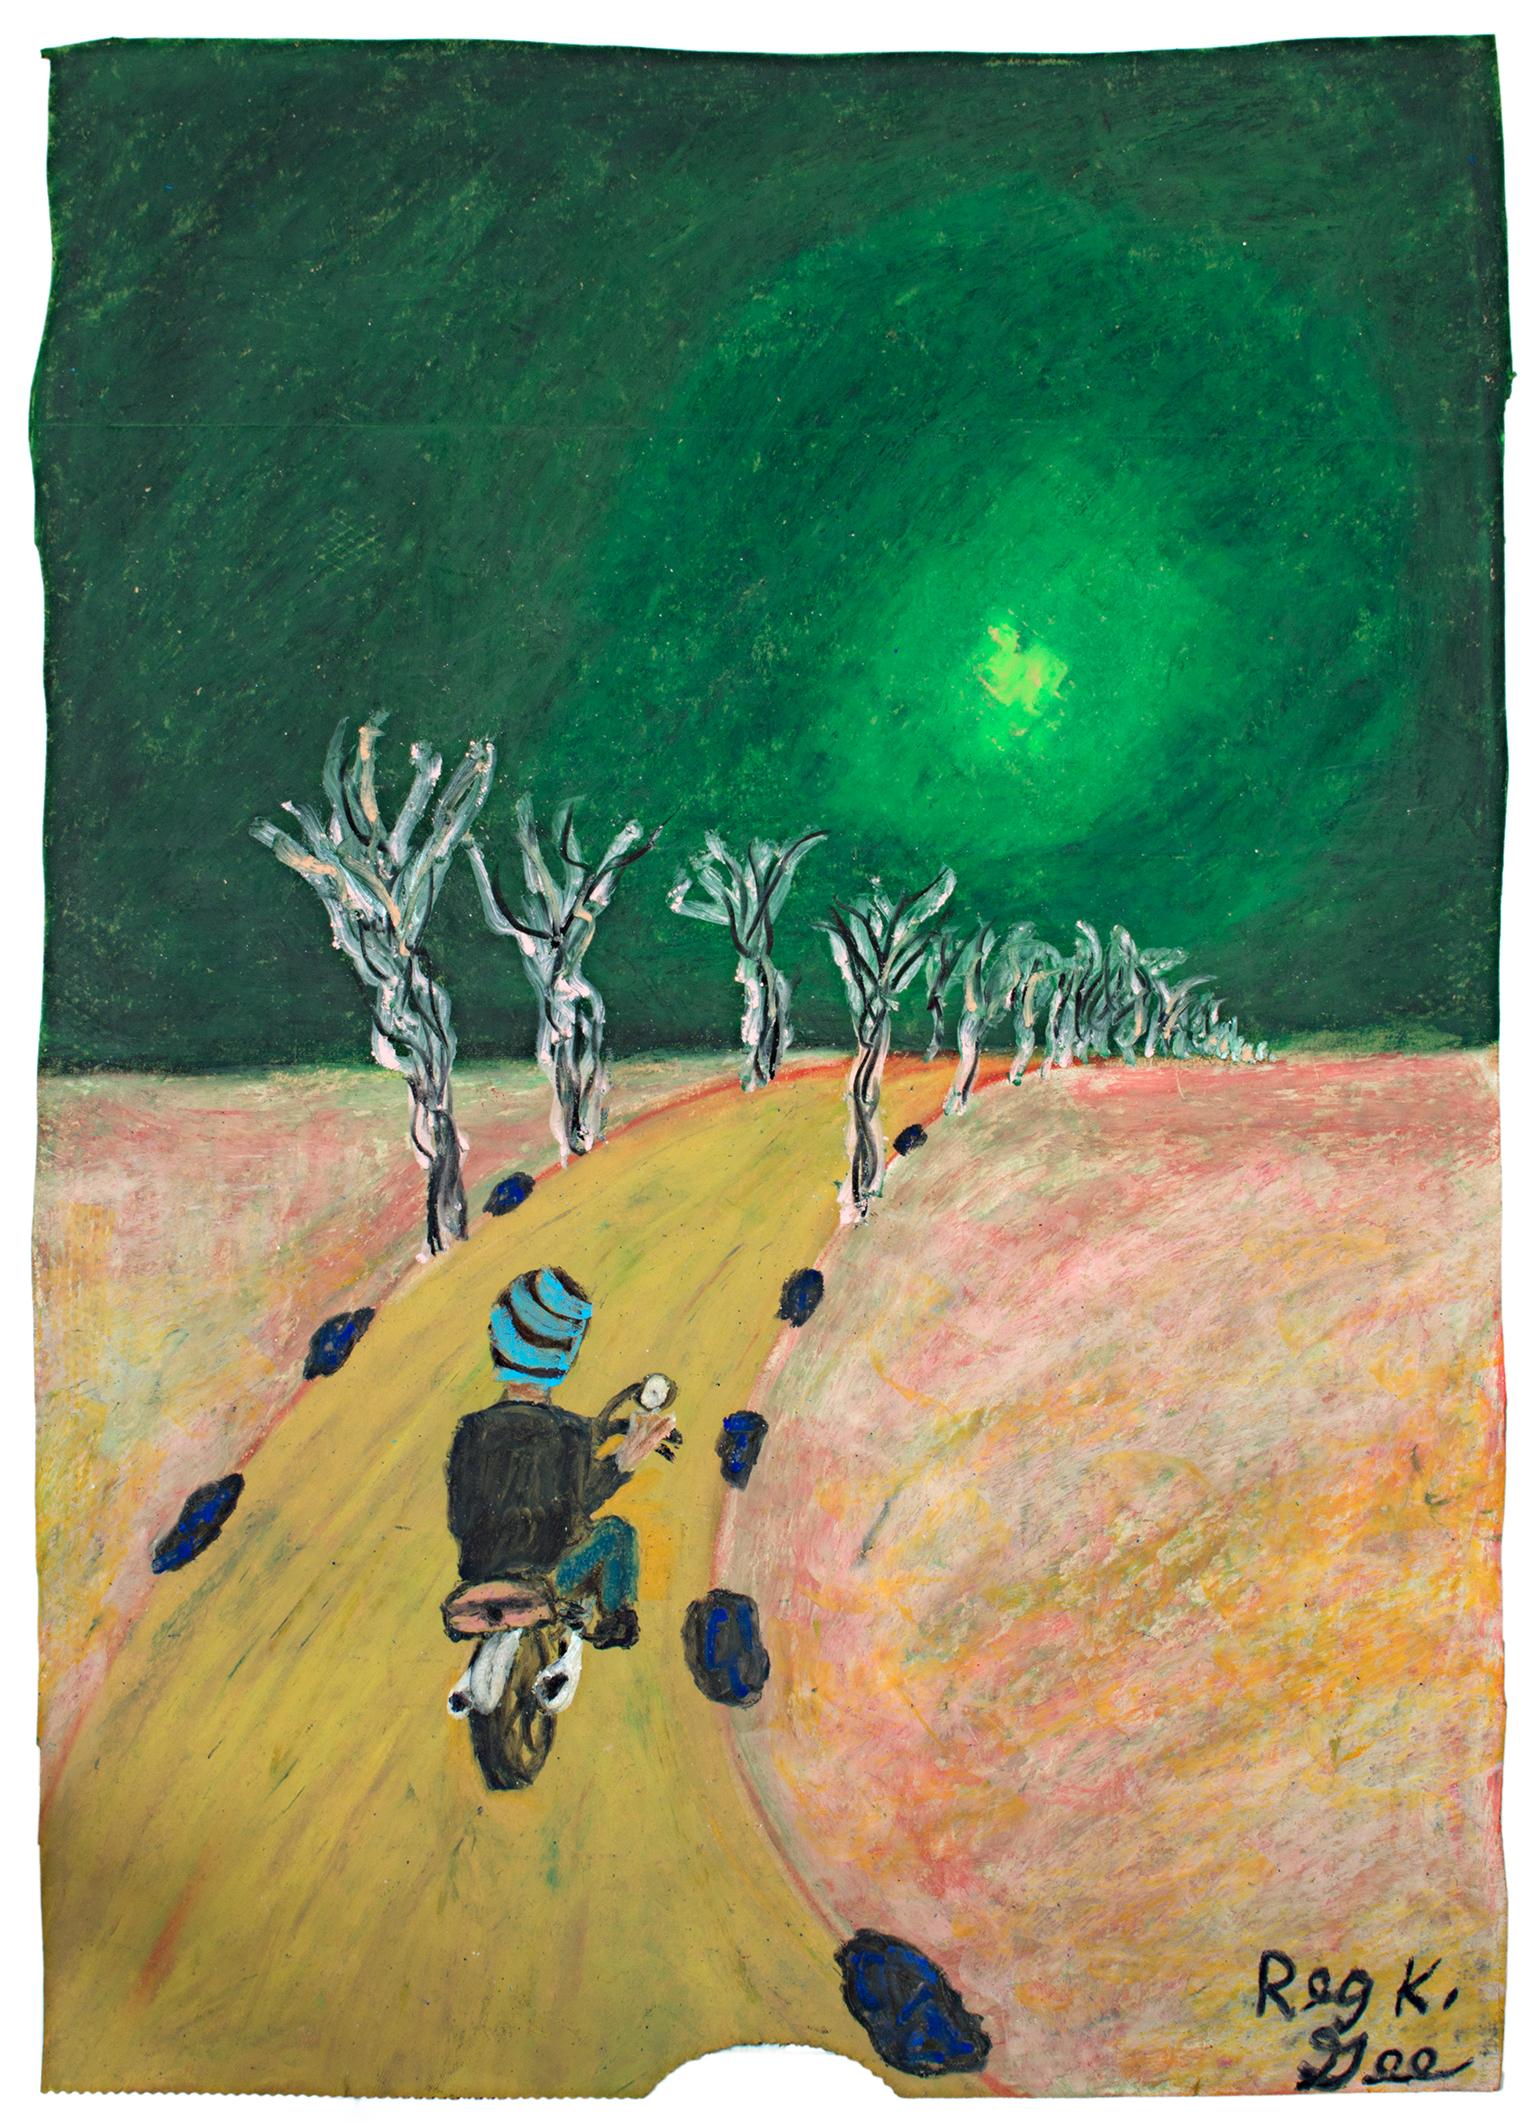 "Off to the Suburbs" is an original oil pastel drawing by Reginald K. Gee. The artist signed the piece lower right. It features a man on a motorcycle riding down a long road into a green sunset. 

16 3/4" x 12" art

Contemporary African American and